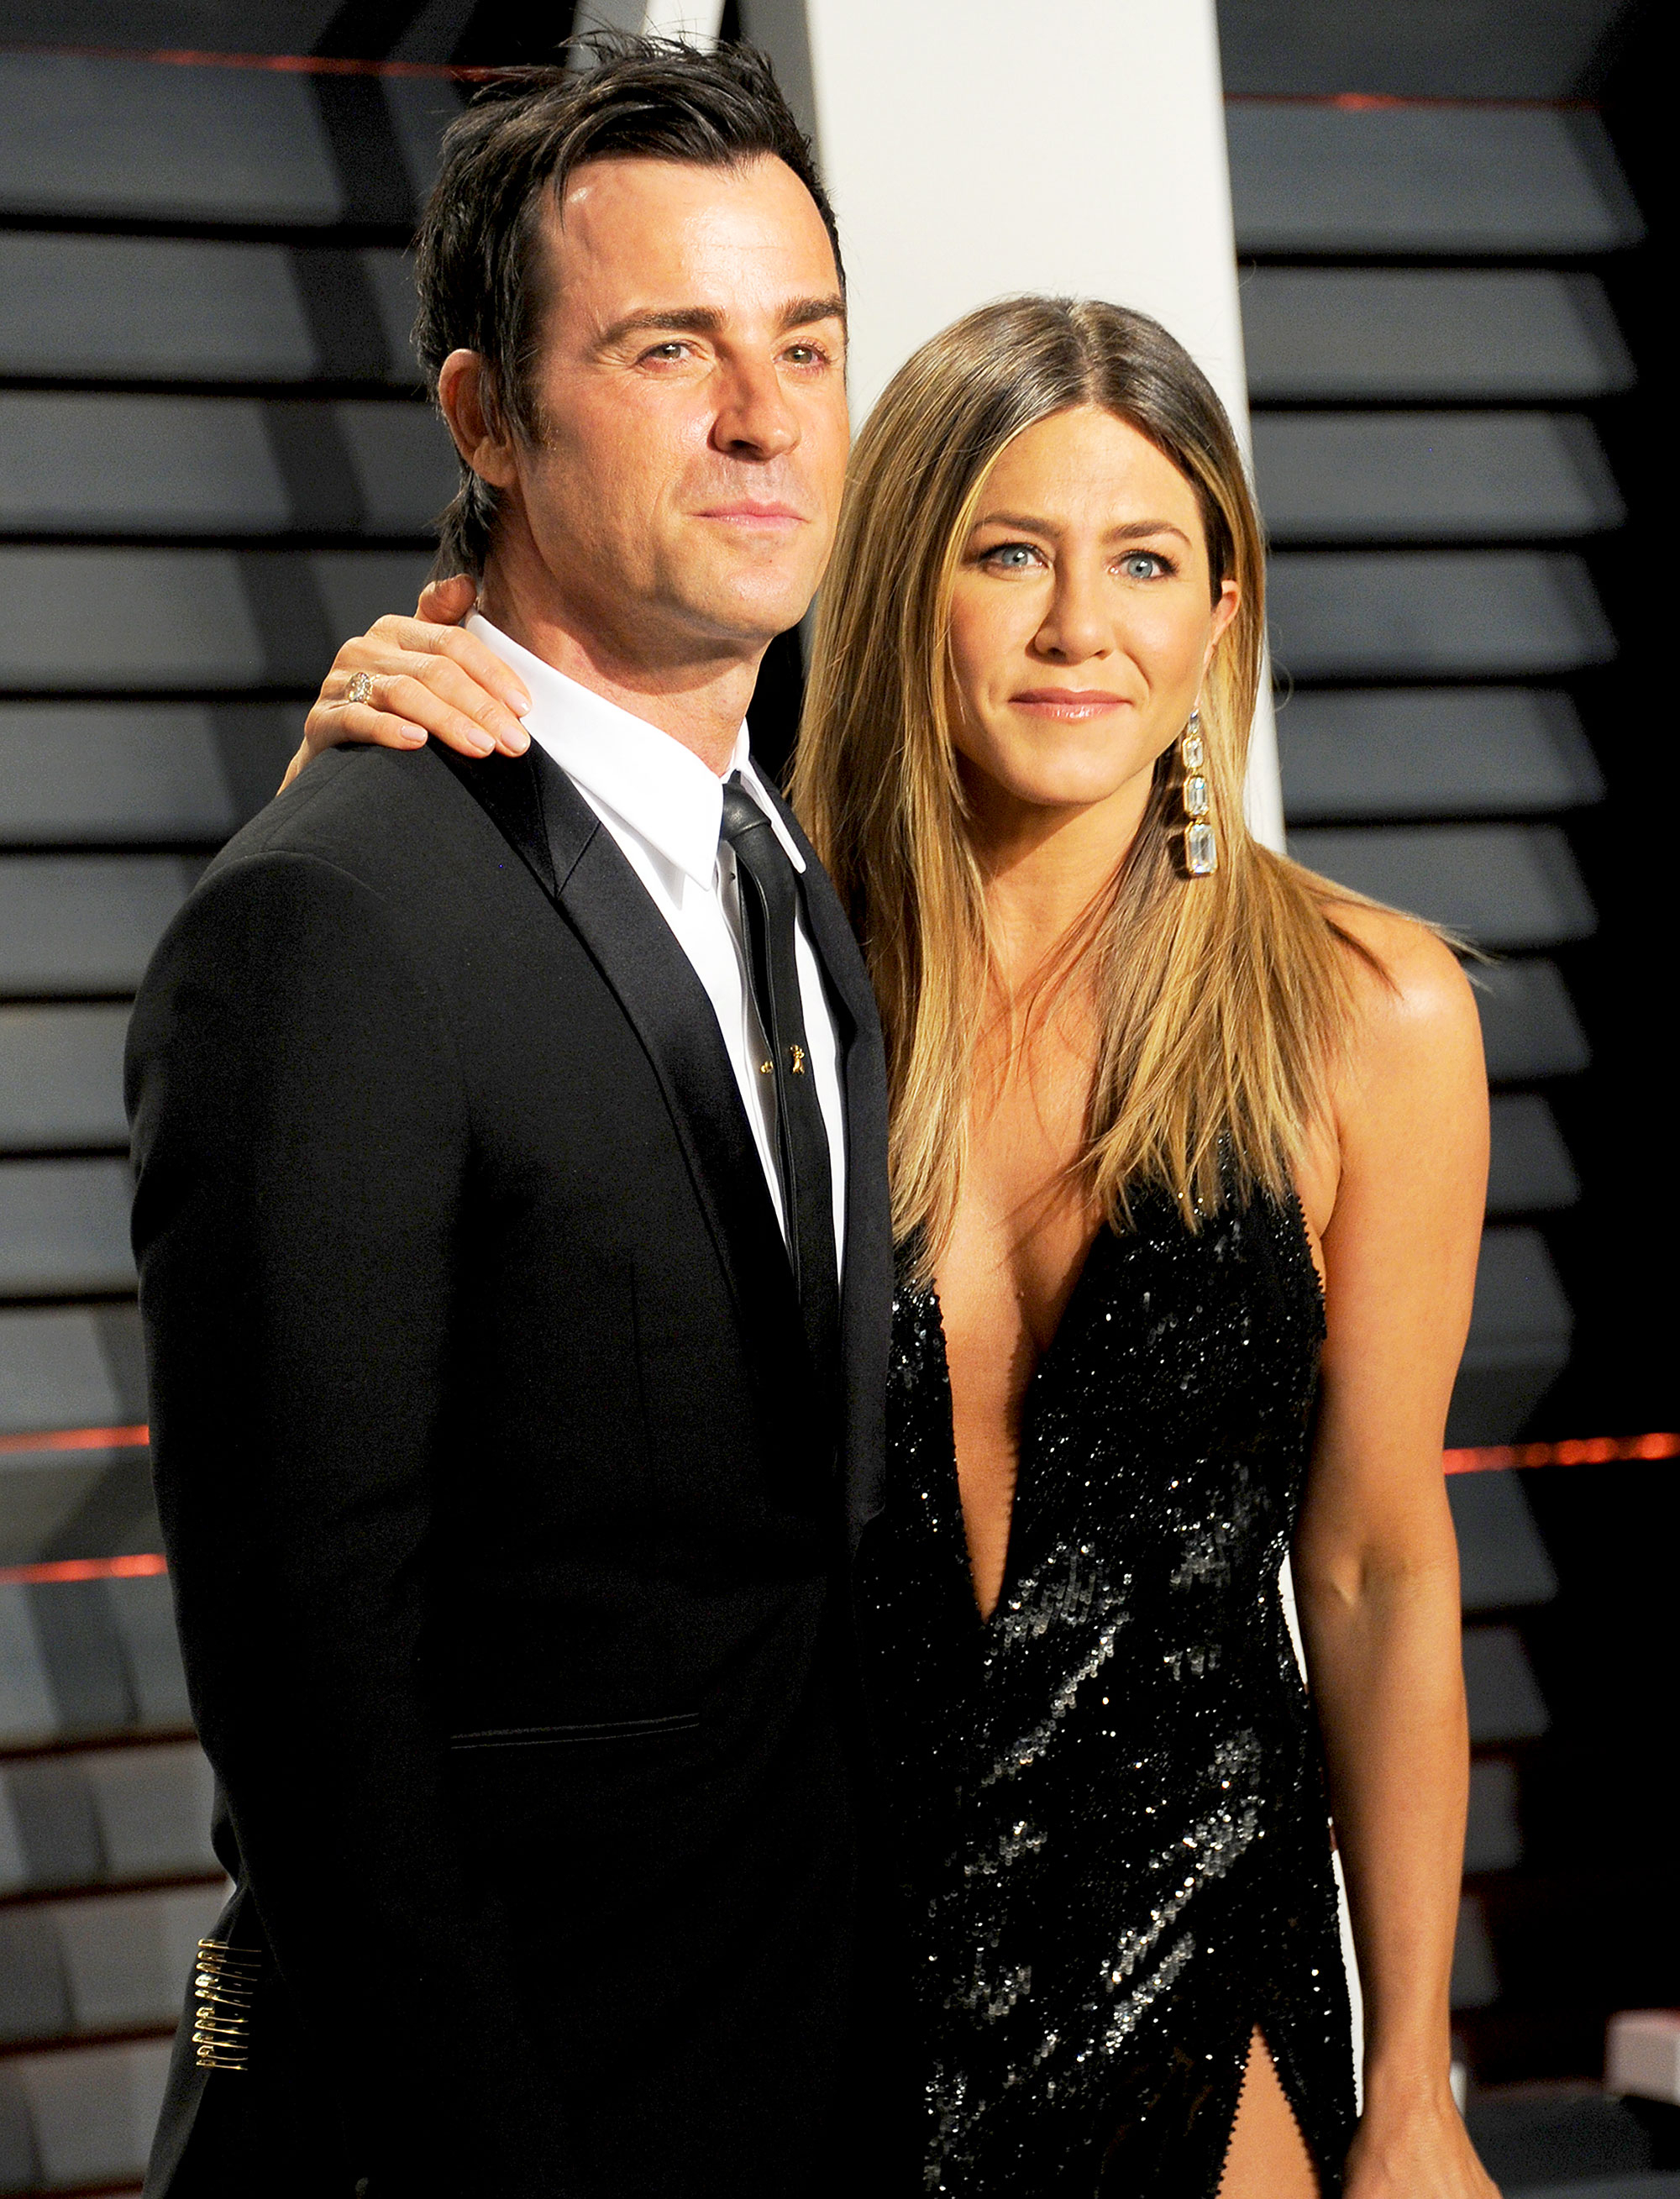 Jennifer-Aniston-and-Justin-Theroux -Have-No-Contact-After-Divorce-split.jpg?quality=74&strip=all